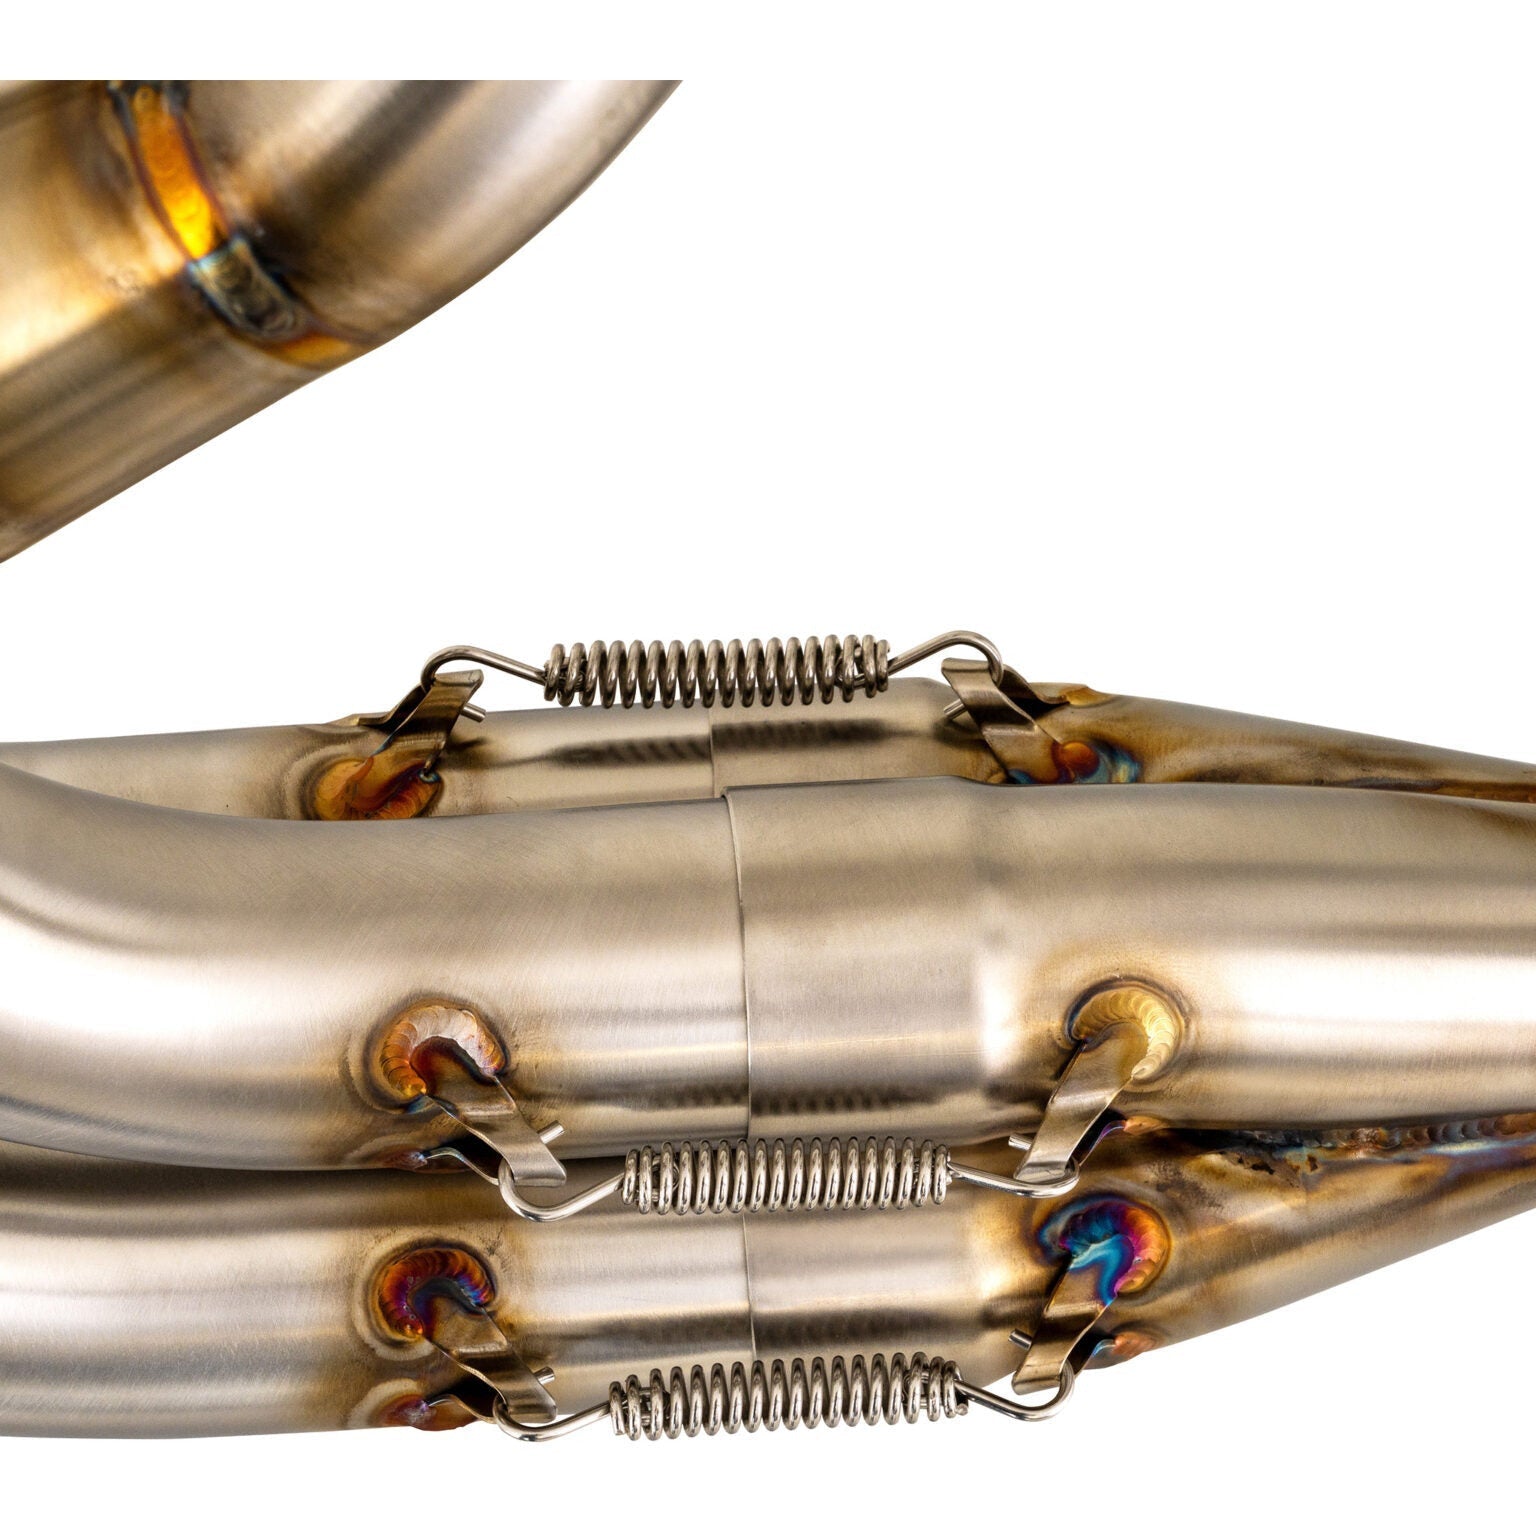 Yamaha YXZ Competition Series Exhaust